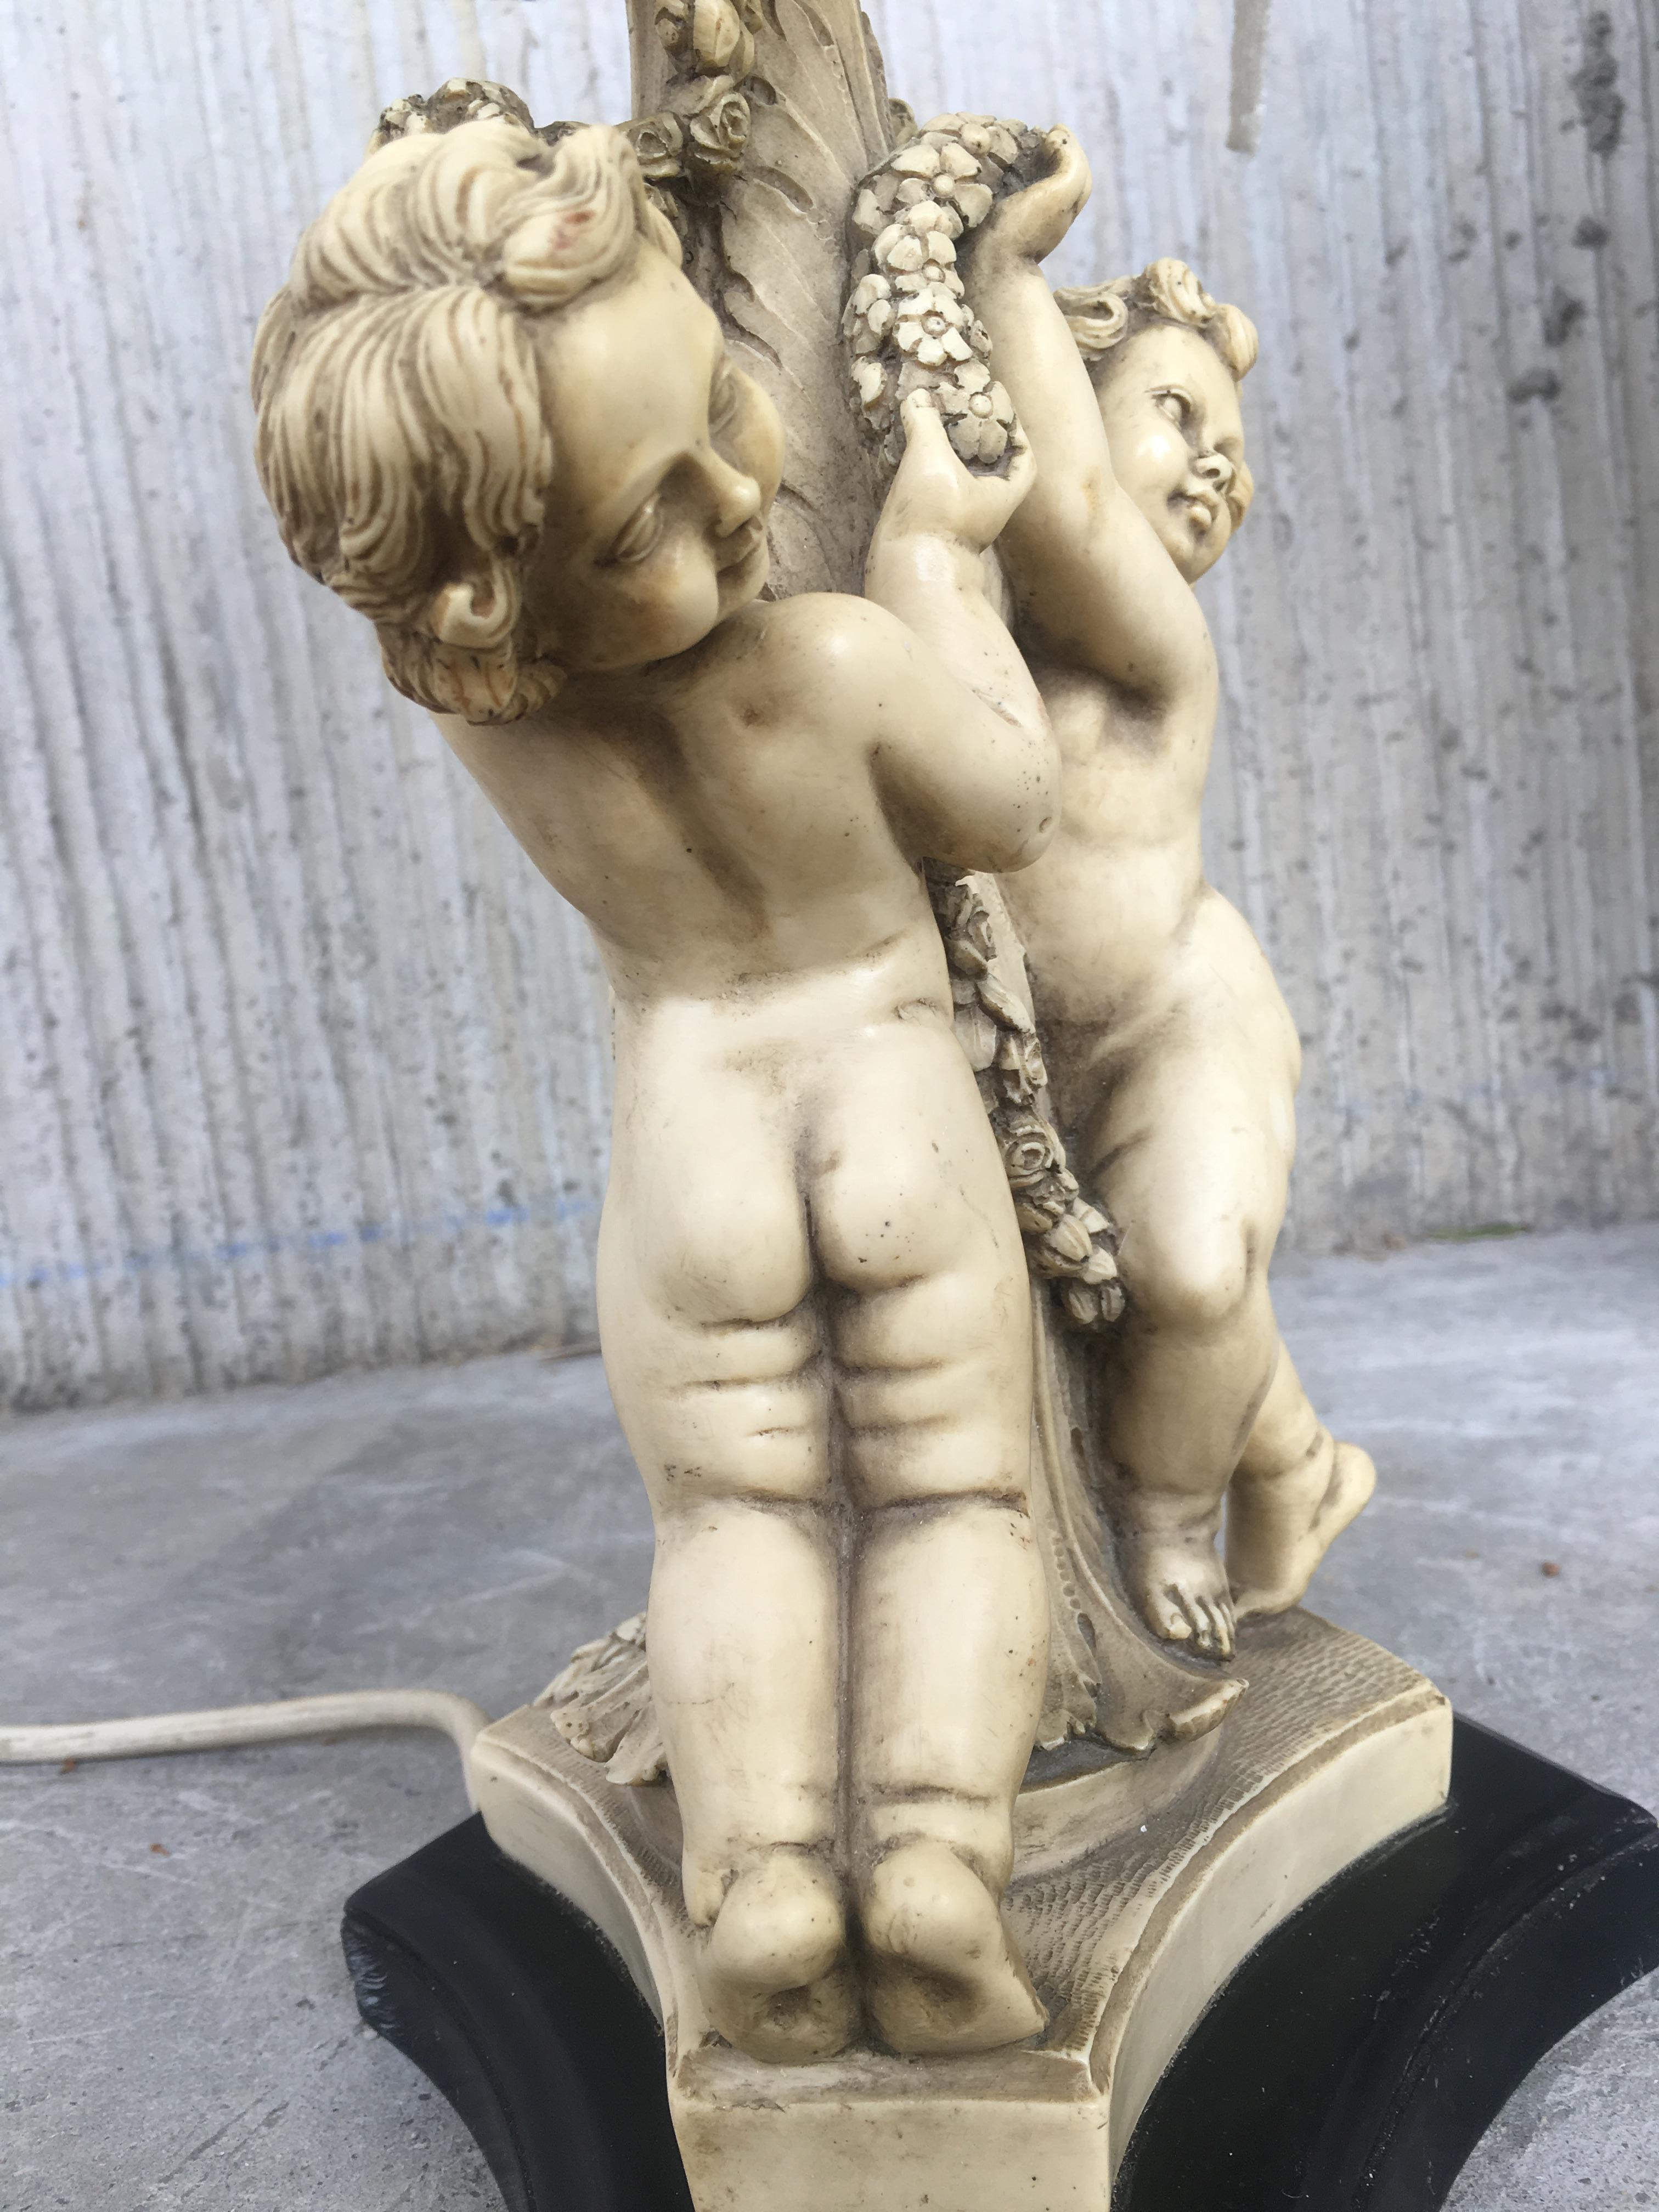 20th Century Pair of White Resin Cherub Lamps on Wooden Bases by G. Ruggeri For Sale 2